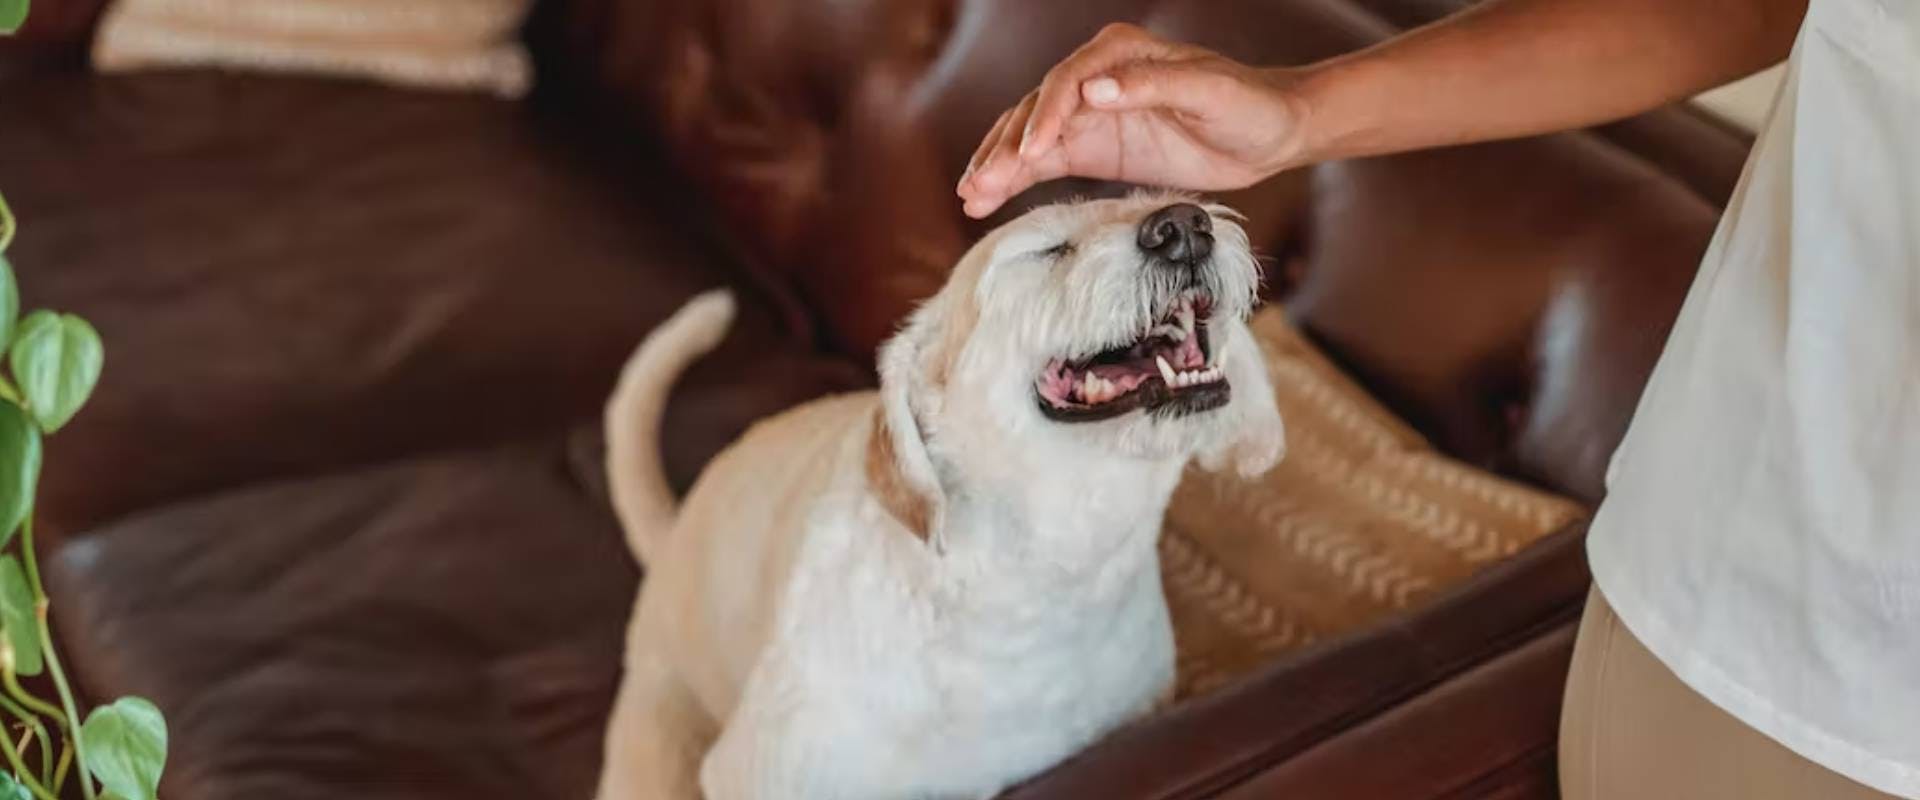 A small white dog sitting on a brown sofa, receiving a stroke from a hand above